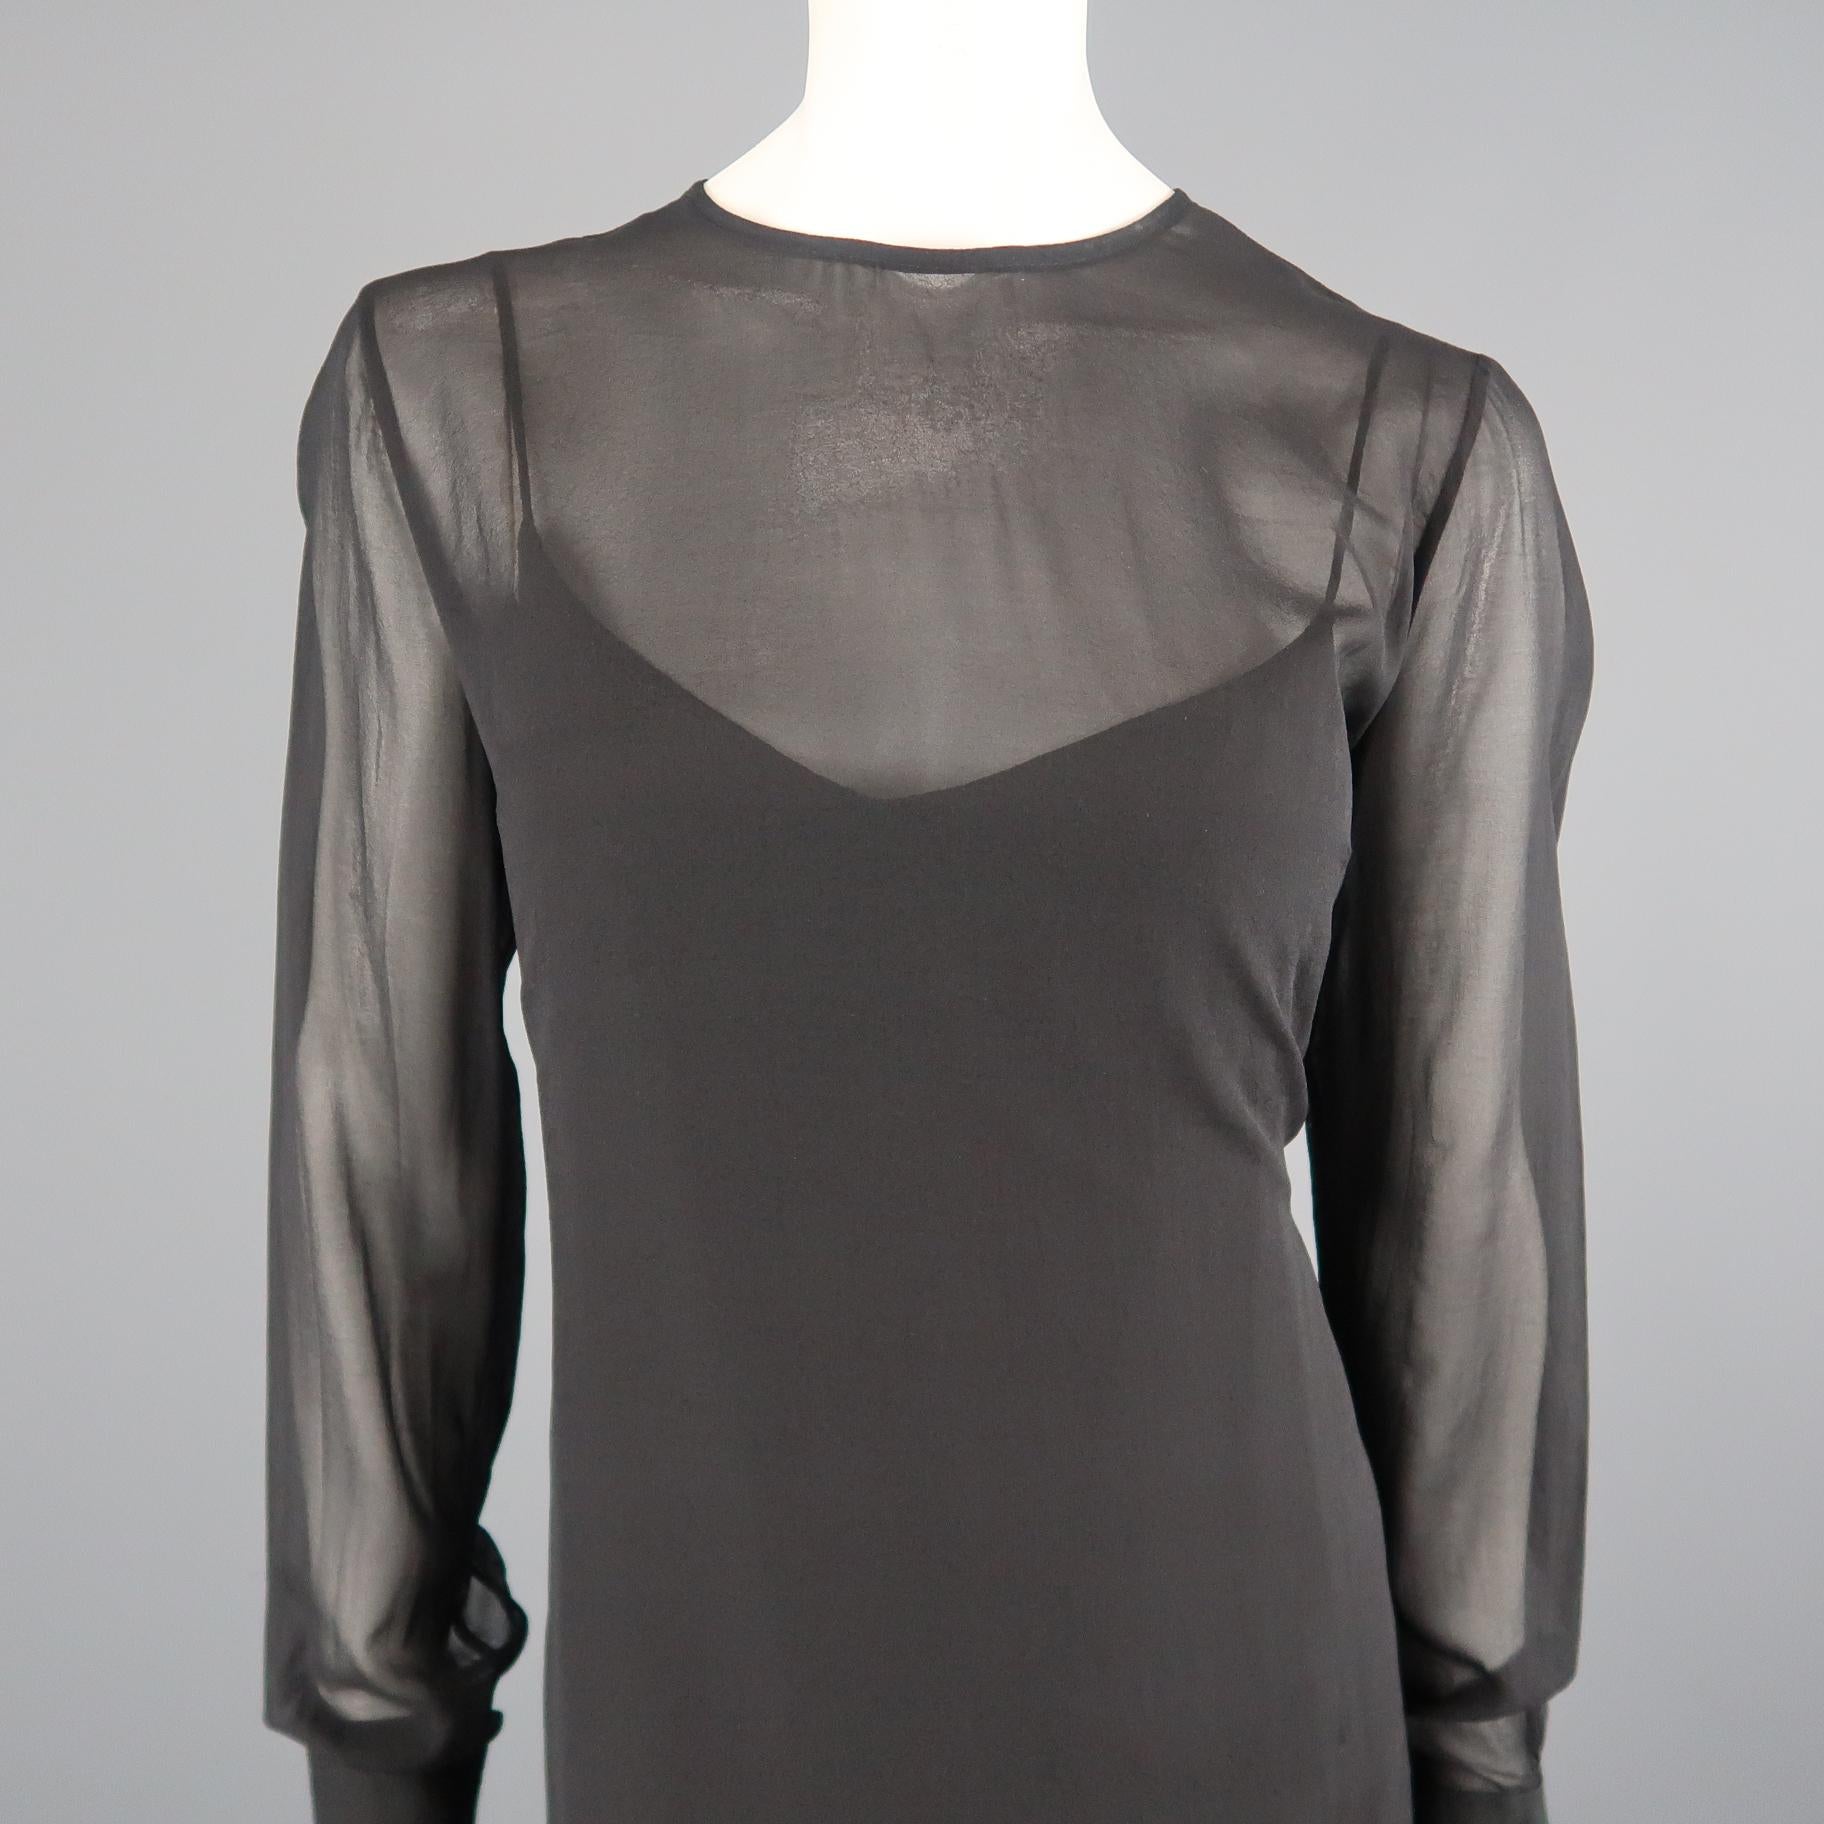 SCANLAN&THEODORE shift dress comes in black silk blend chiffon with a round neck, and three button cuffs. With Slip. Made in Australia.
 
Excellent Pre-Owned Condition.
Marked: 12
 
Measurements:
 
Shoulder: 16 in.
Bust: 42 in.
Waist: 40 in.
Hip: 42